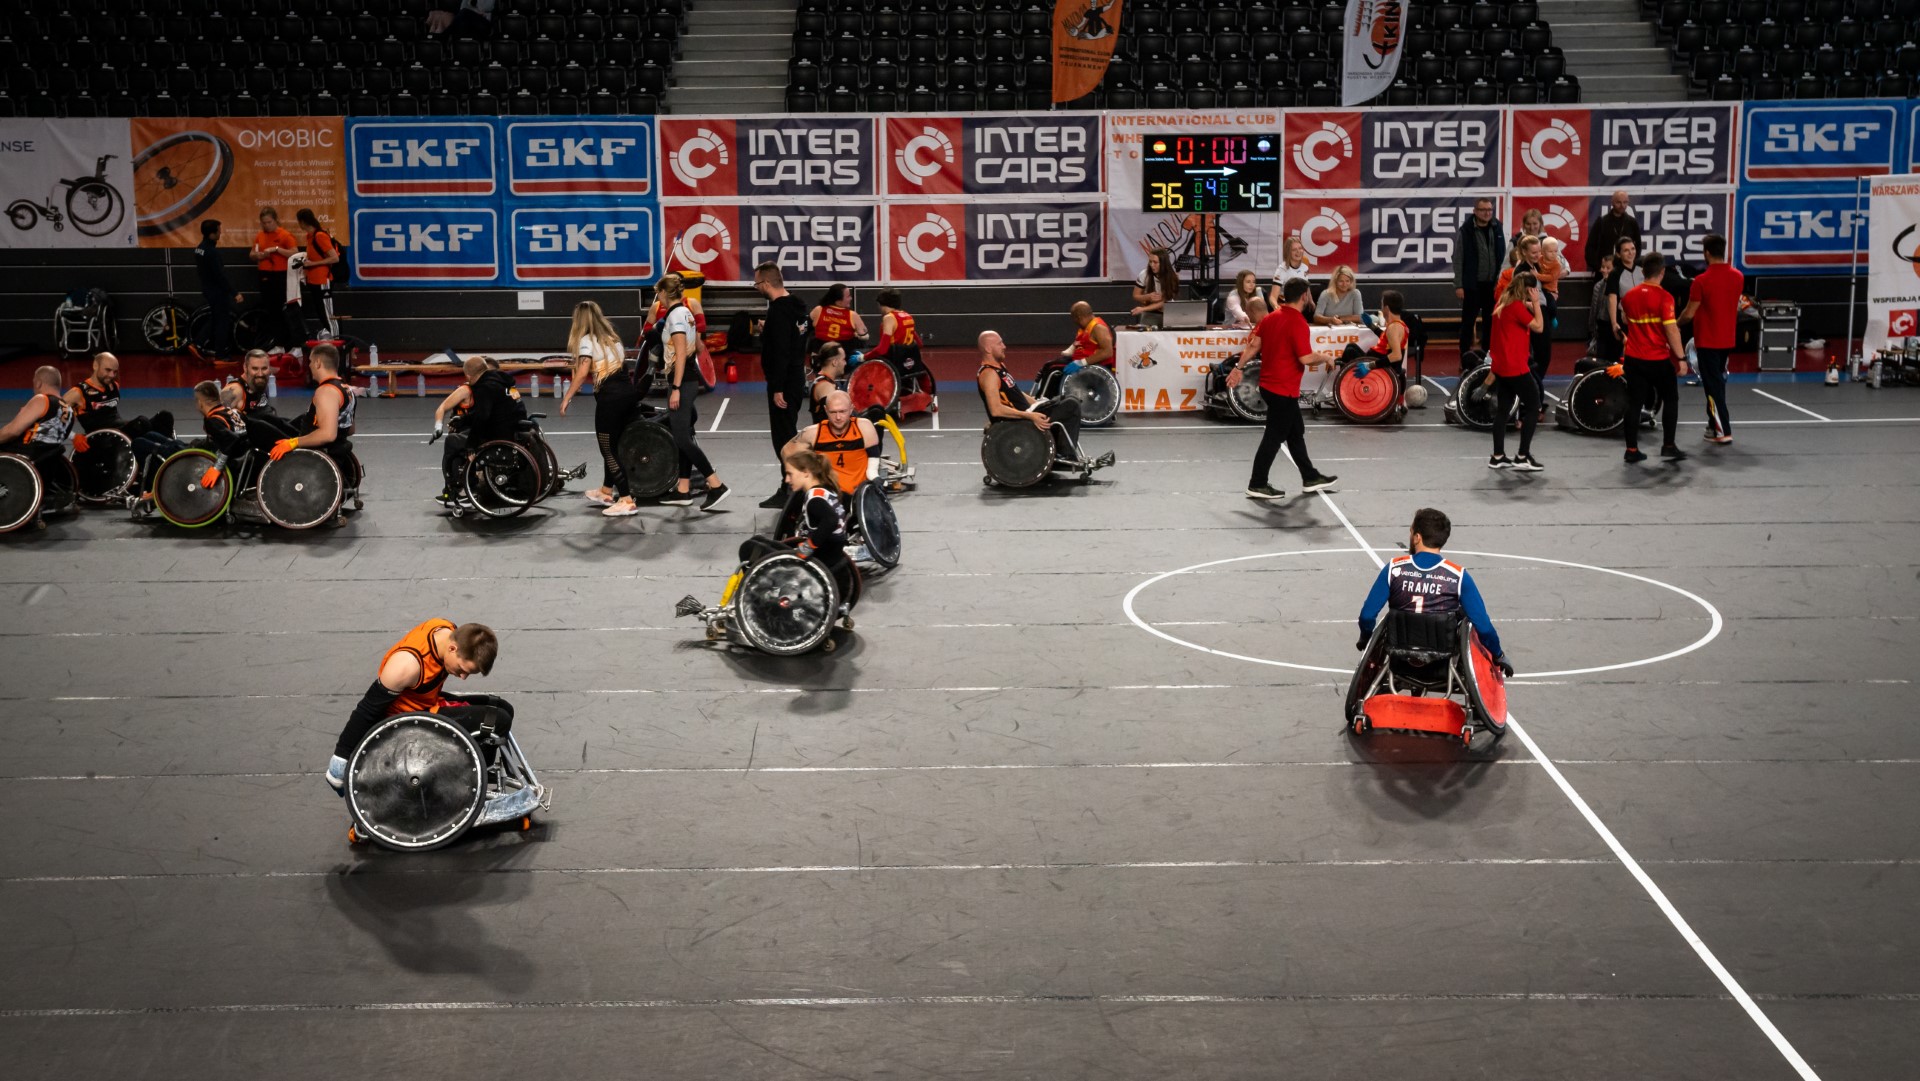 How MBL supports wheelchairs for rugby. A photo from the wheelchair rugby tournament.